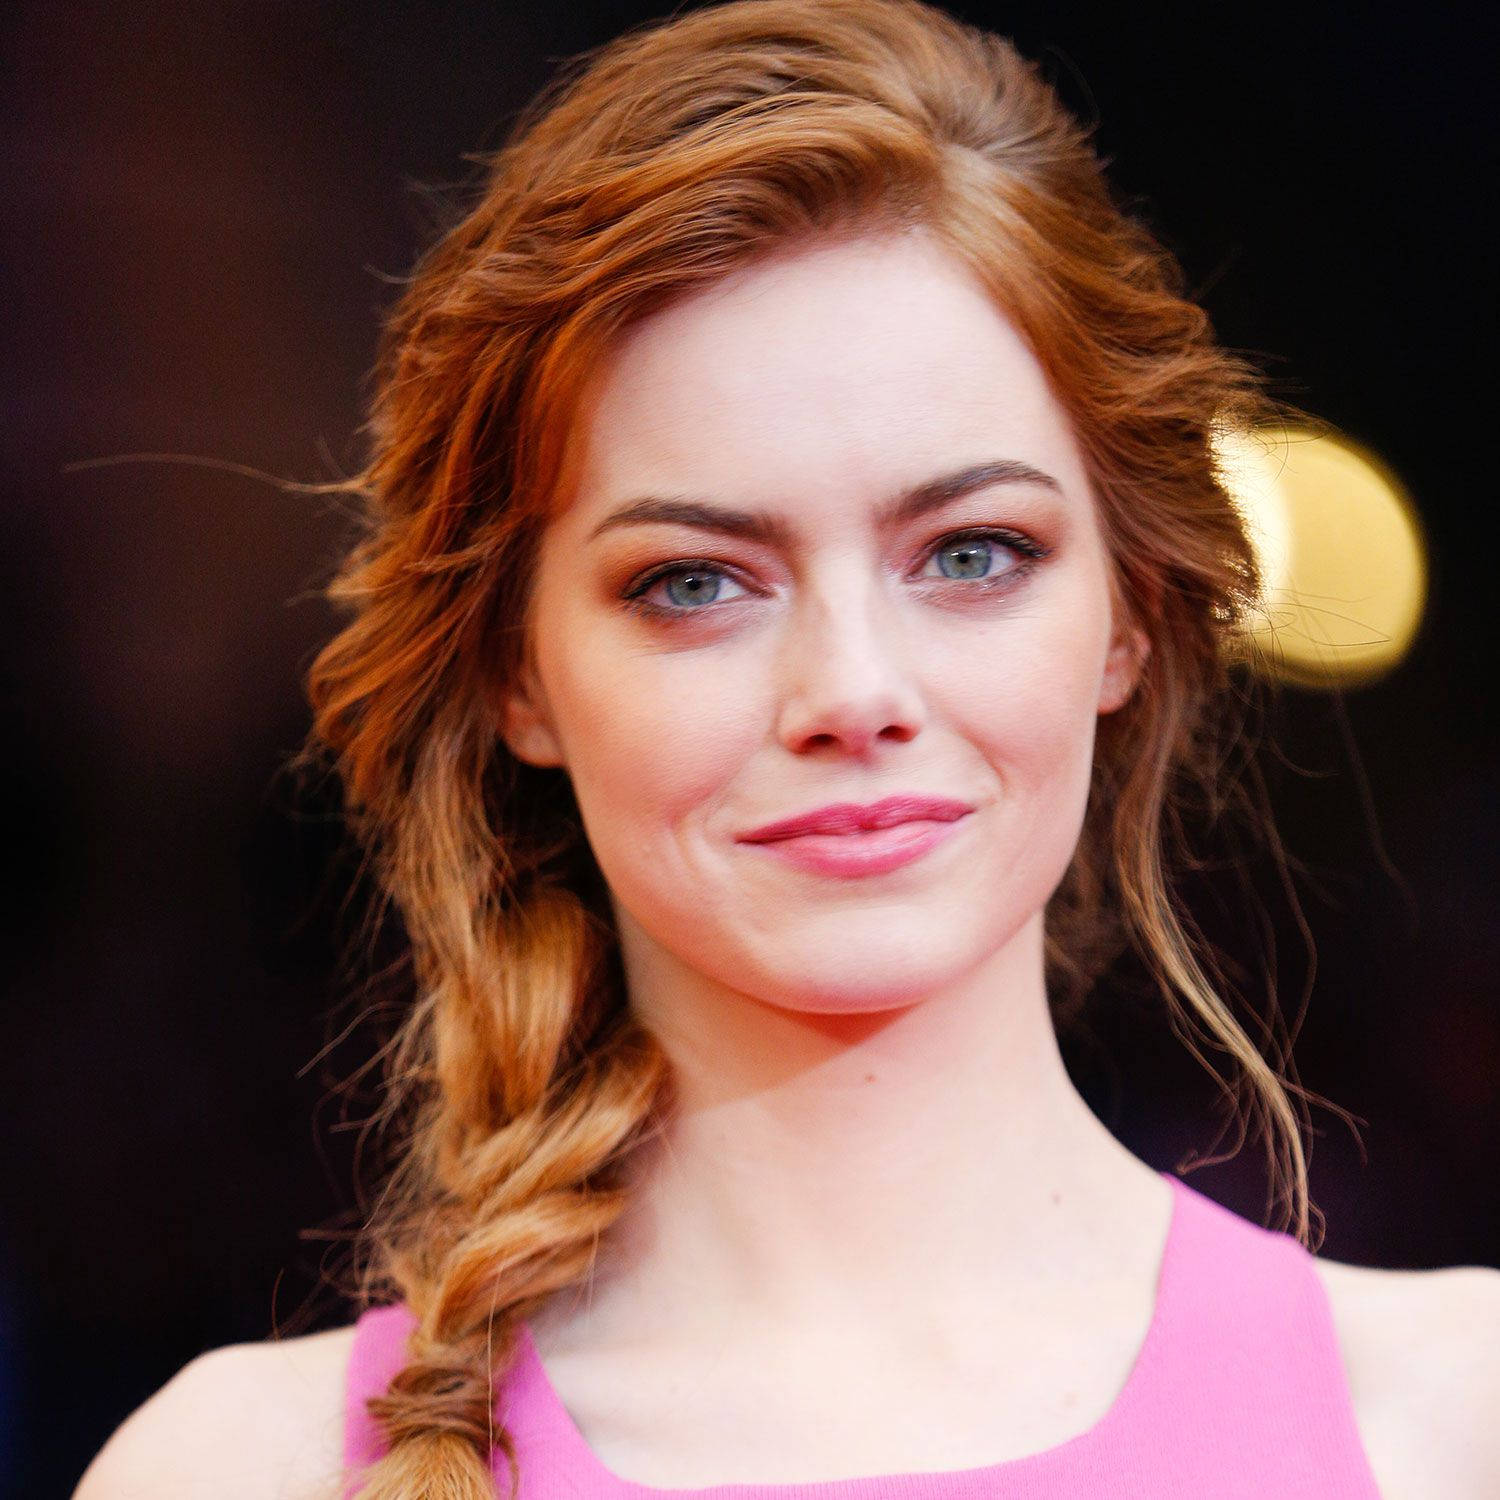 Emma Stone In Pink Top Wallpaper